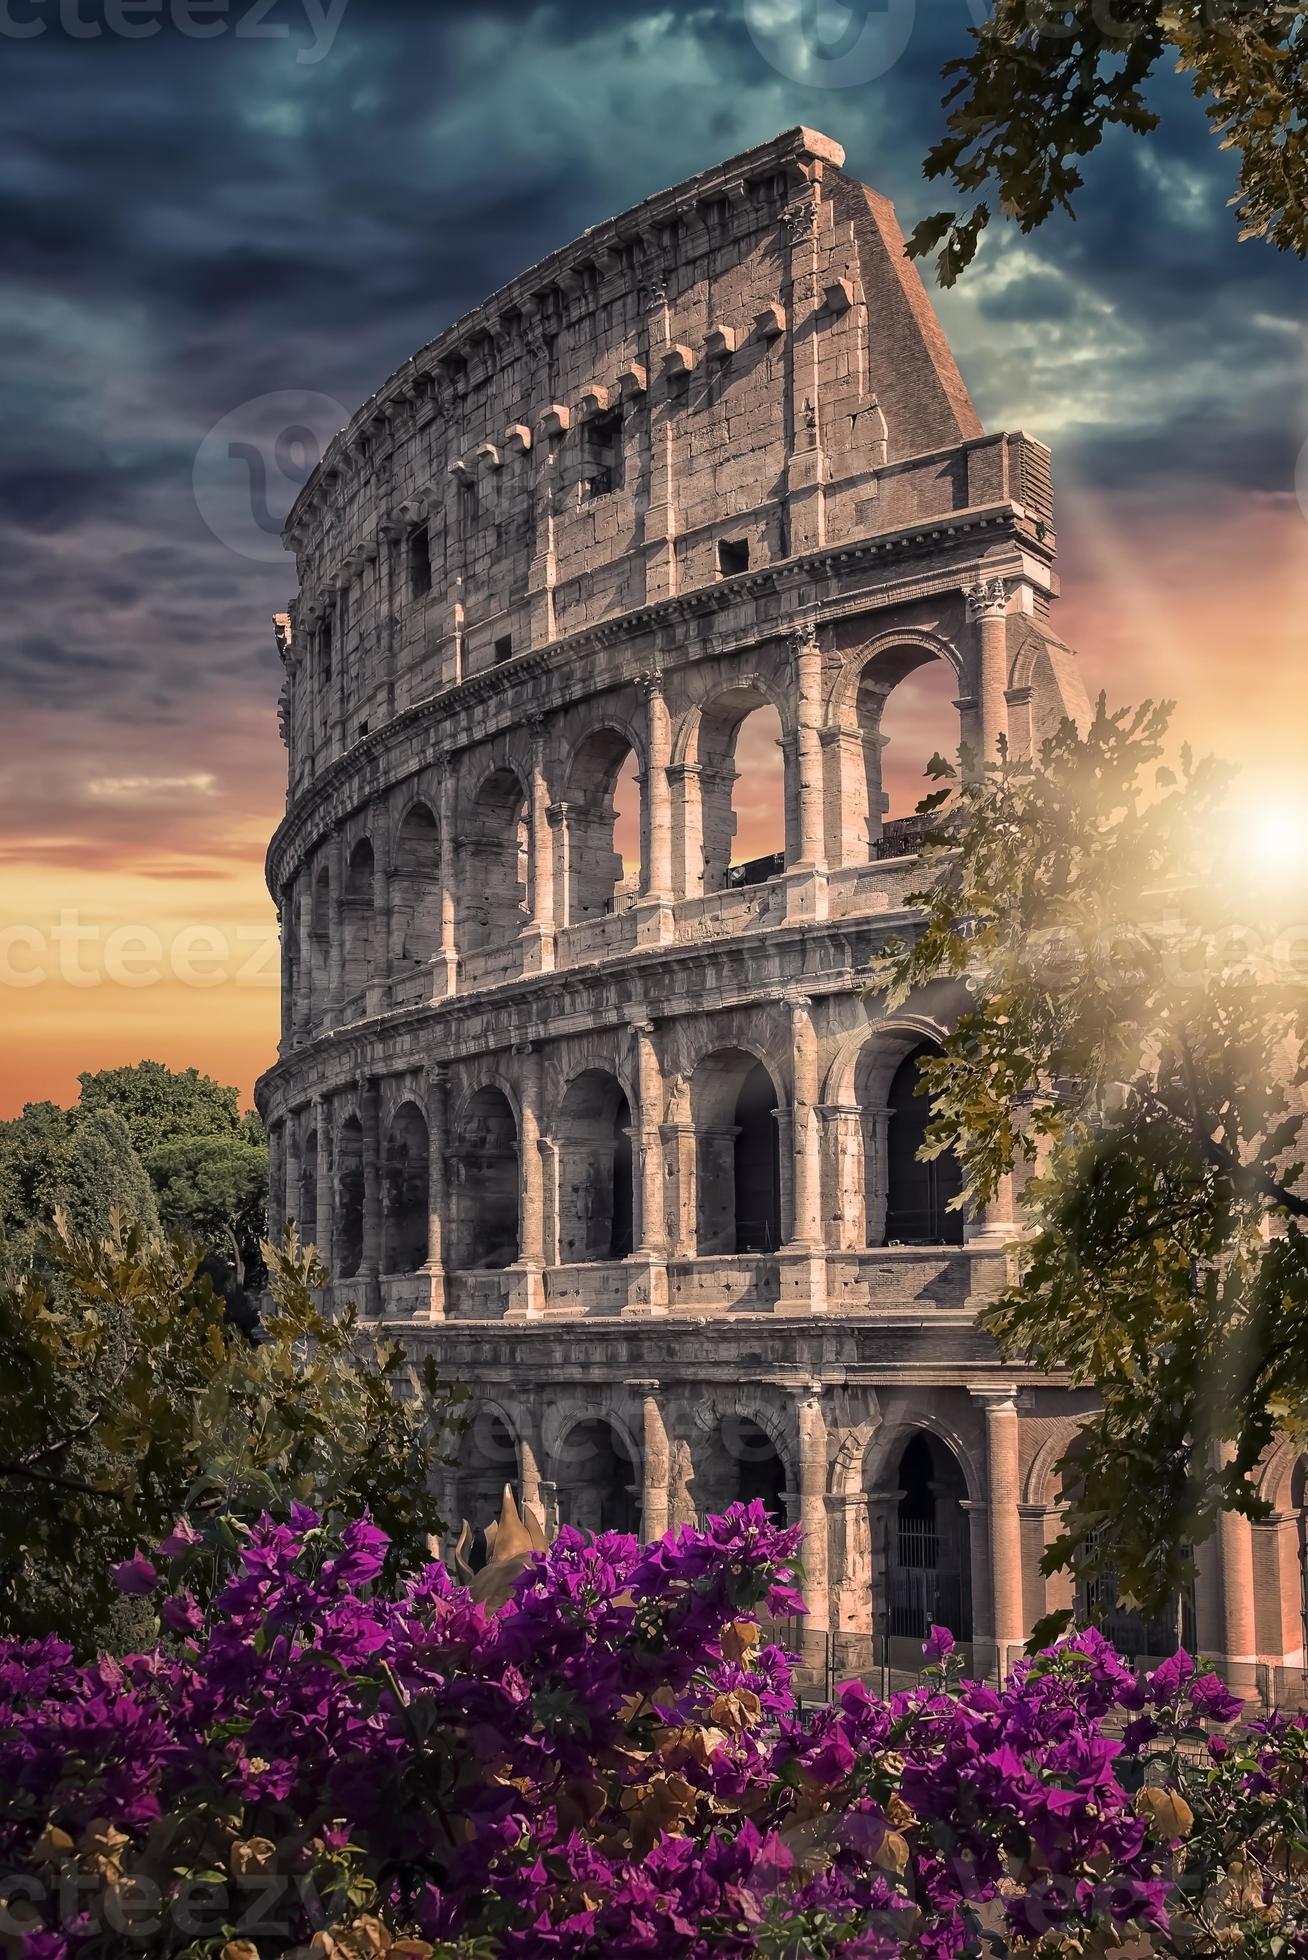 The Colosseum the most famous monument in Rome photo